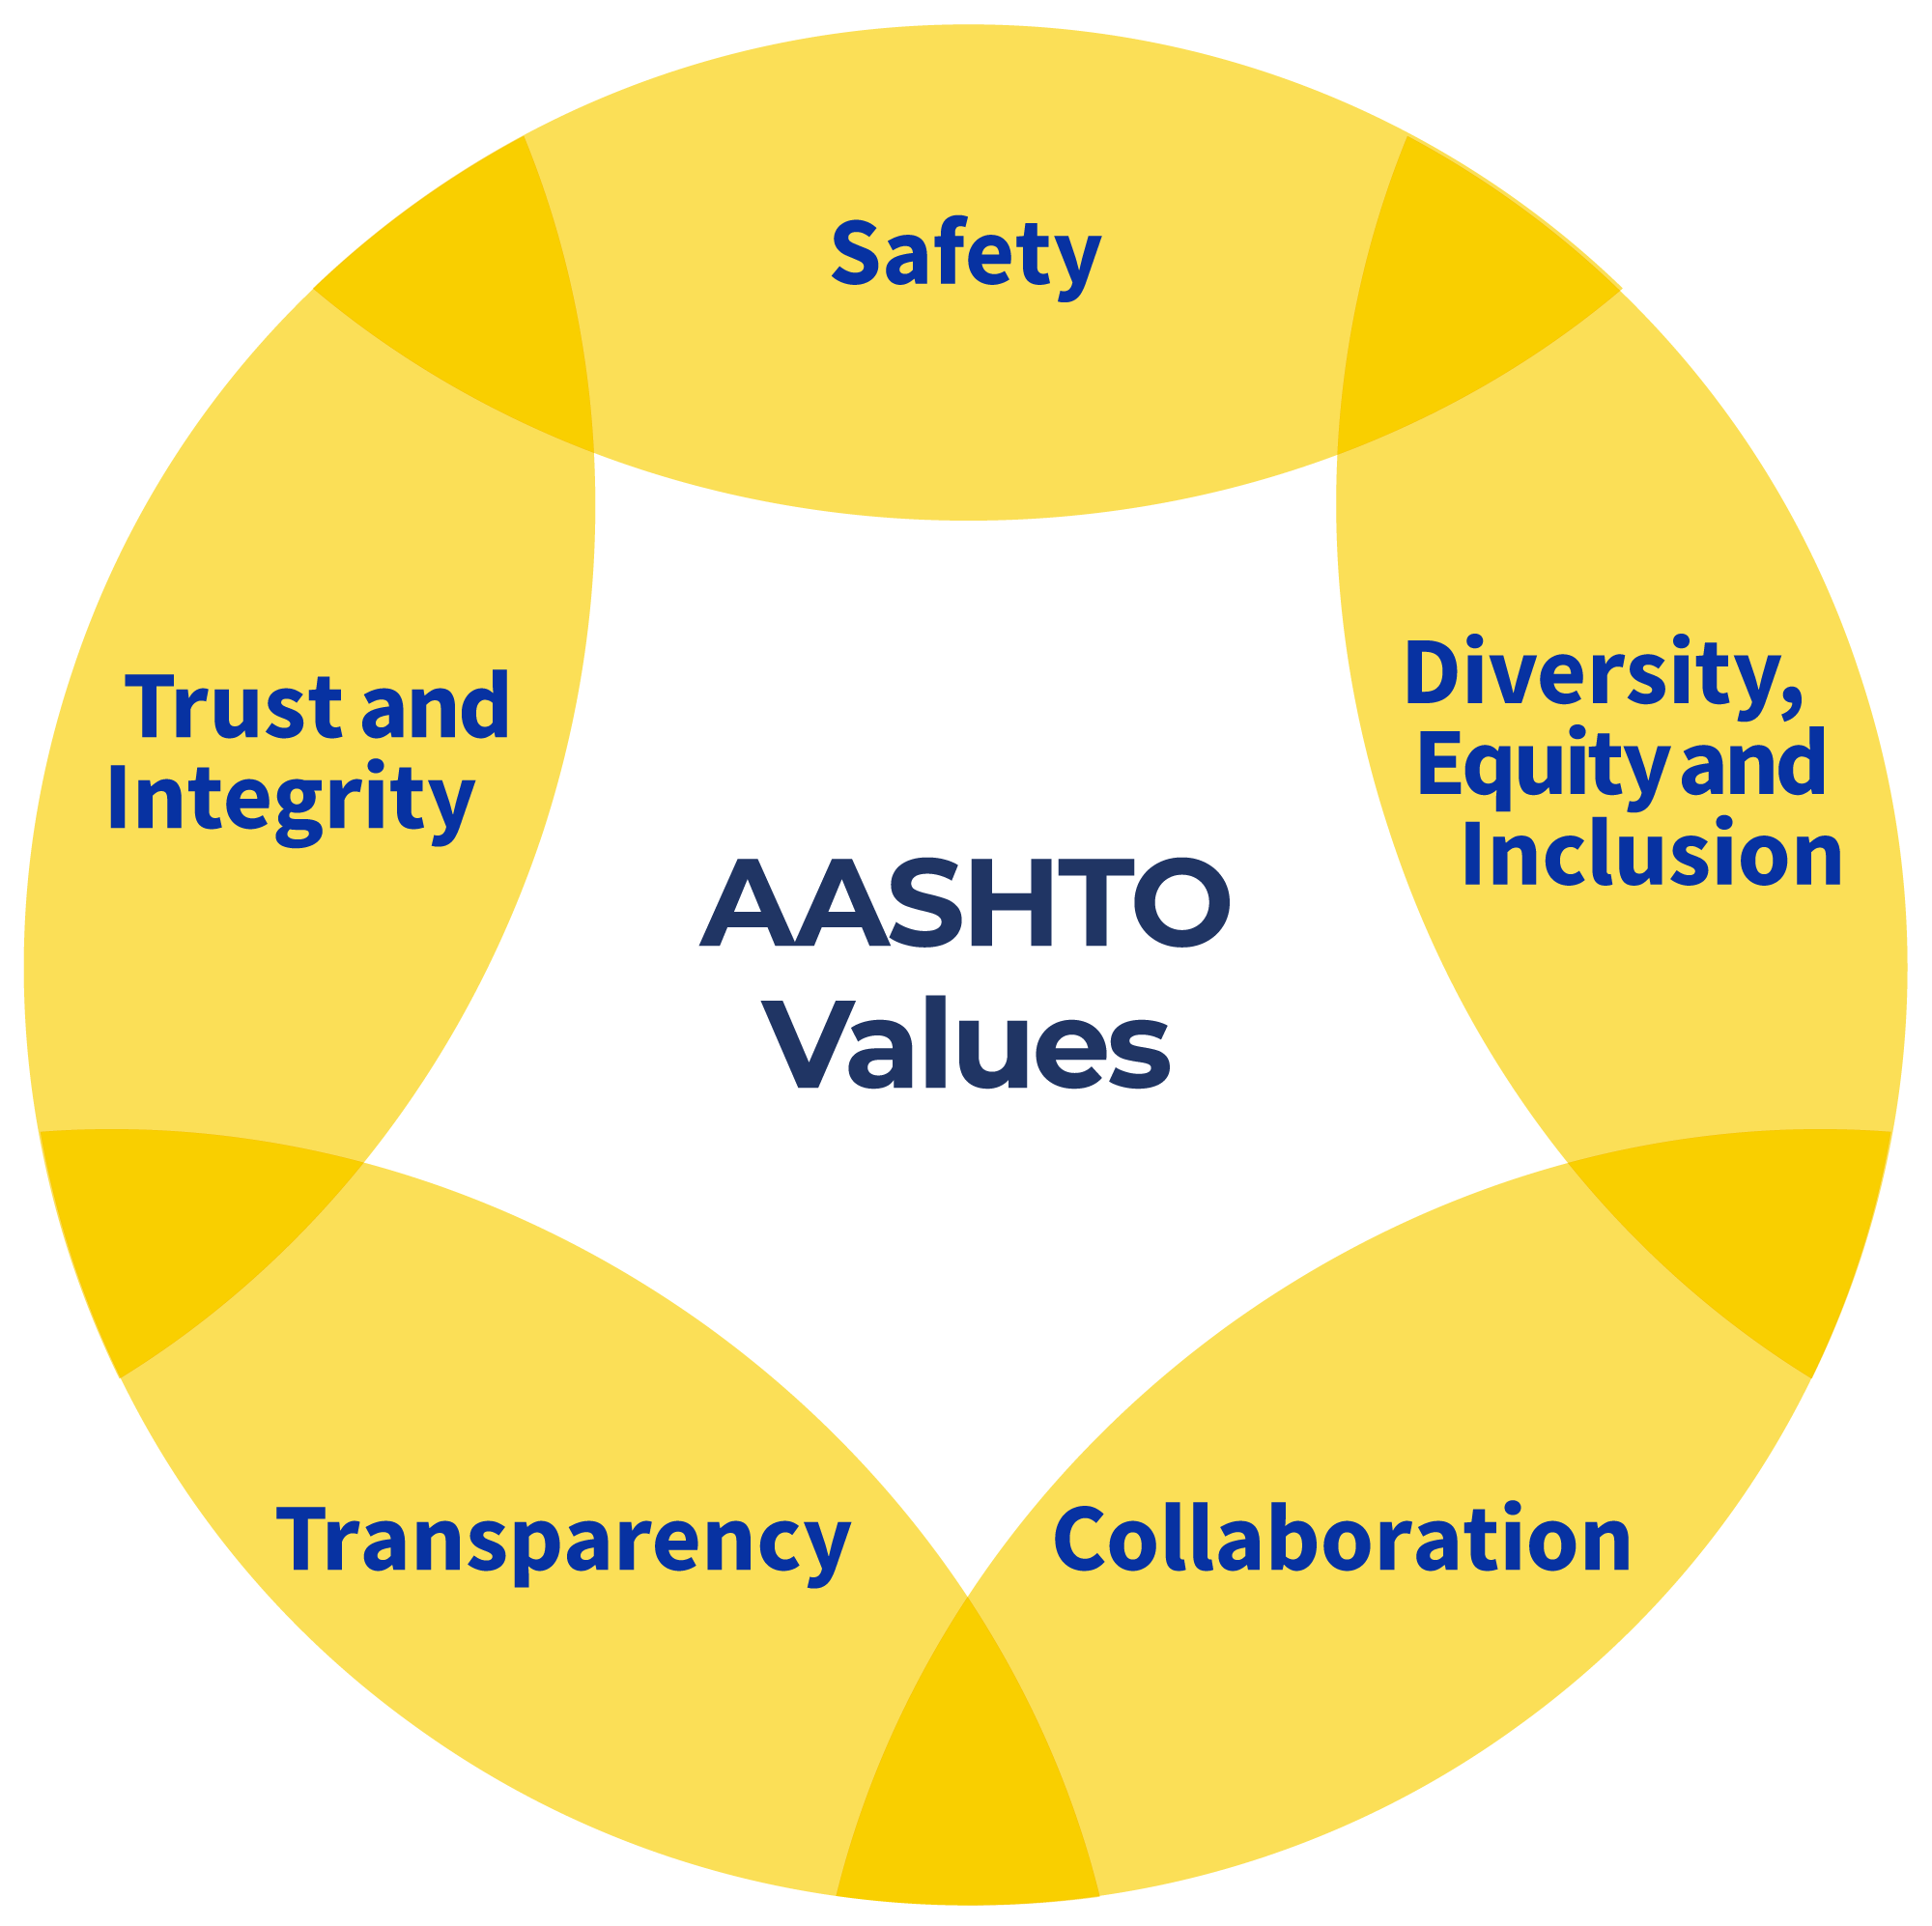 AASHTO Values: Safety, Diversity Equity and Inclusion, Collaboration, Transparency, Trust and Integrity